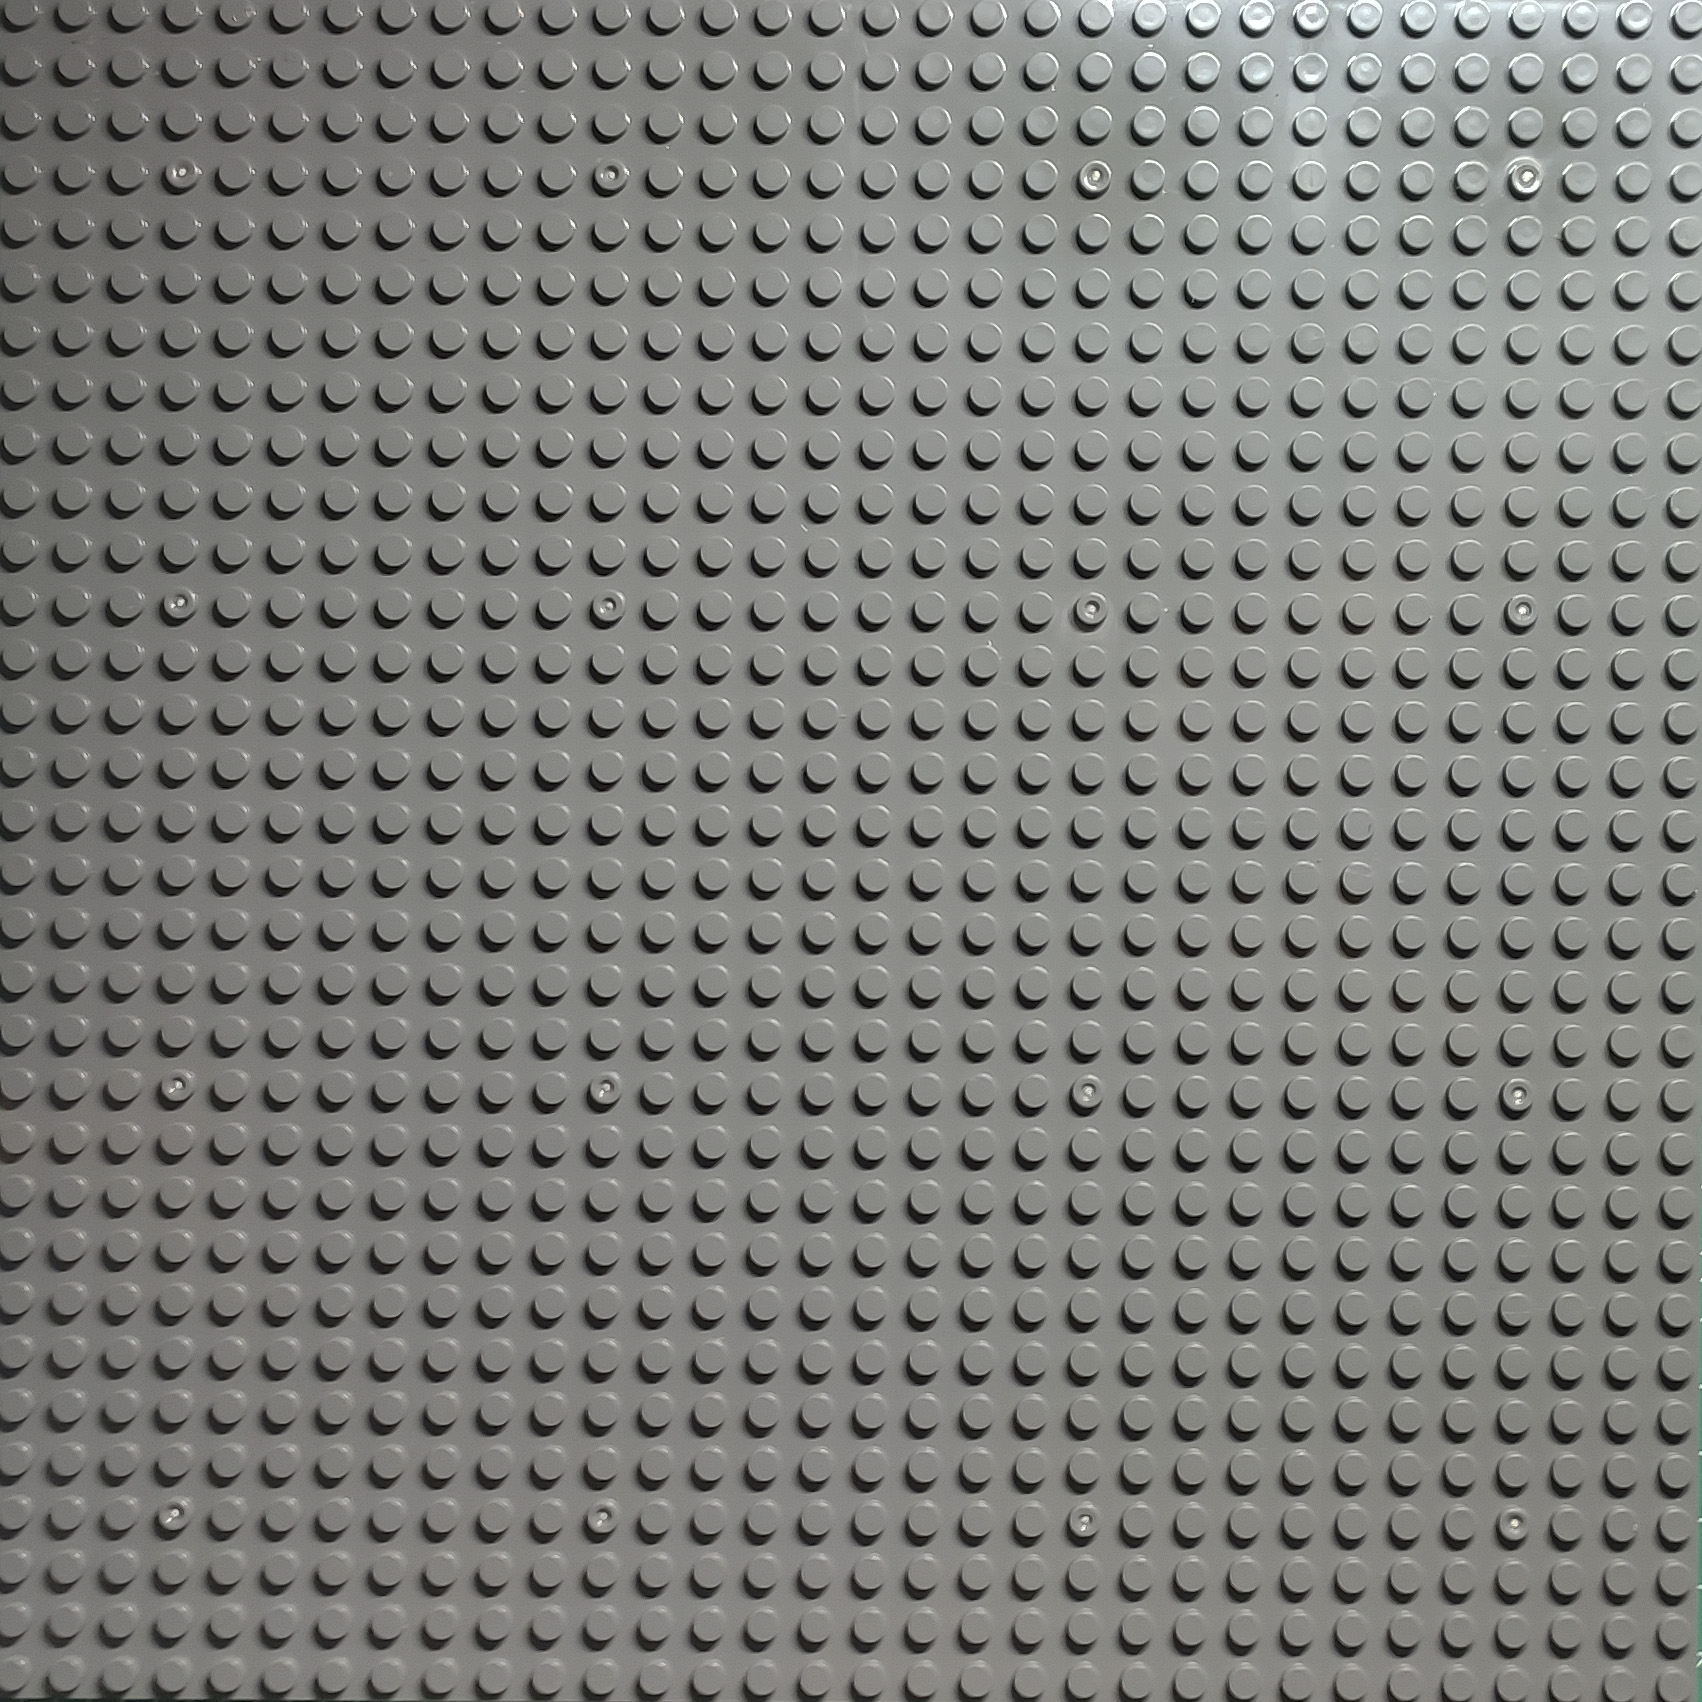 Classic Baseplates, 10\"x10\" Dark Grey Compatible with LEGO